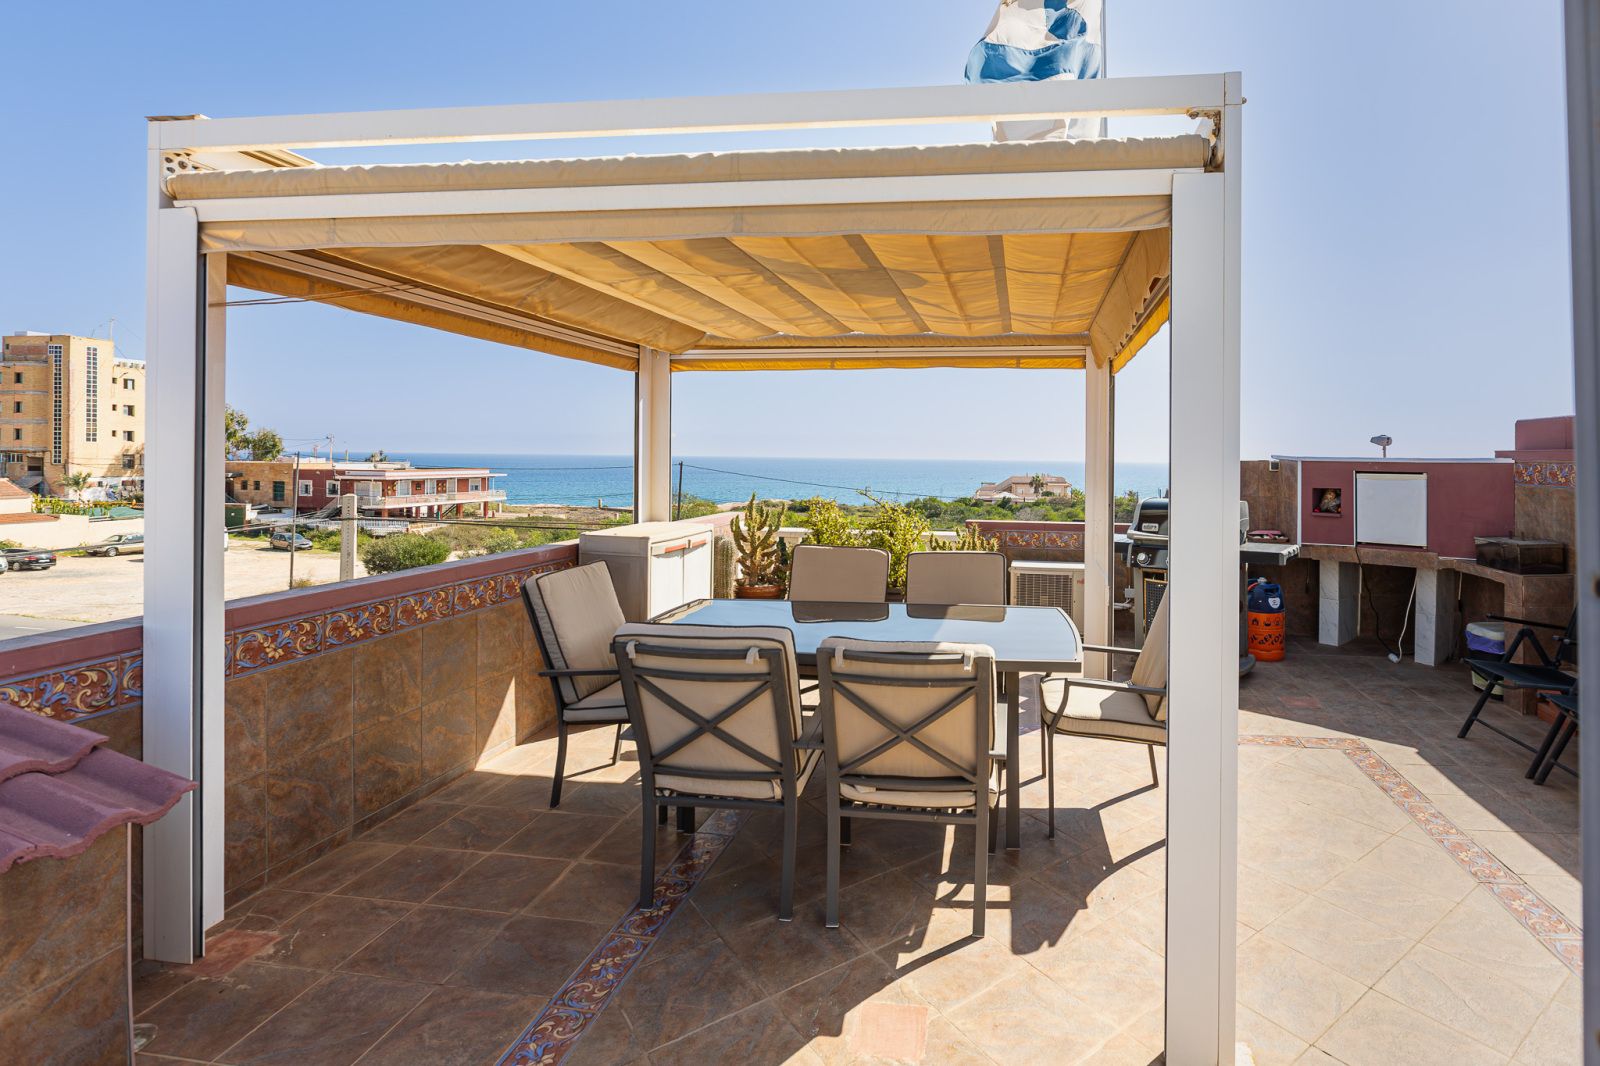 Mediterranean upstairs apartment for sale with roof terrace and sea views in Los Frutales, Torrevieja.